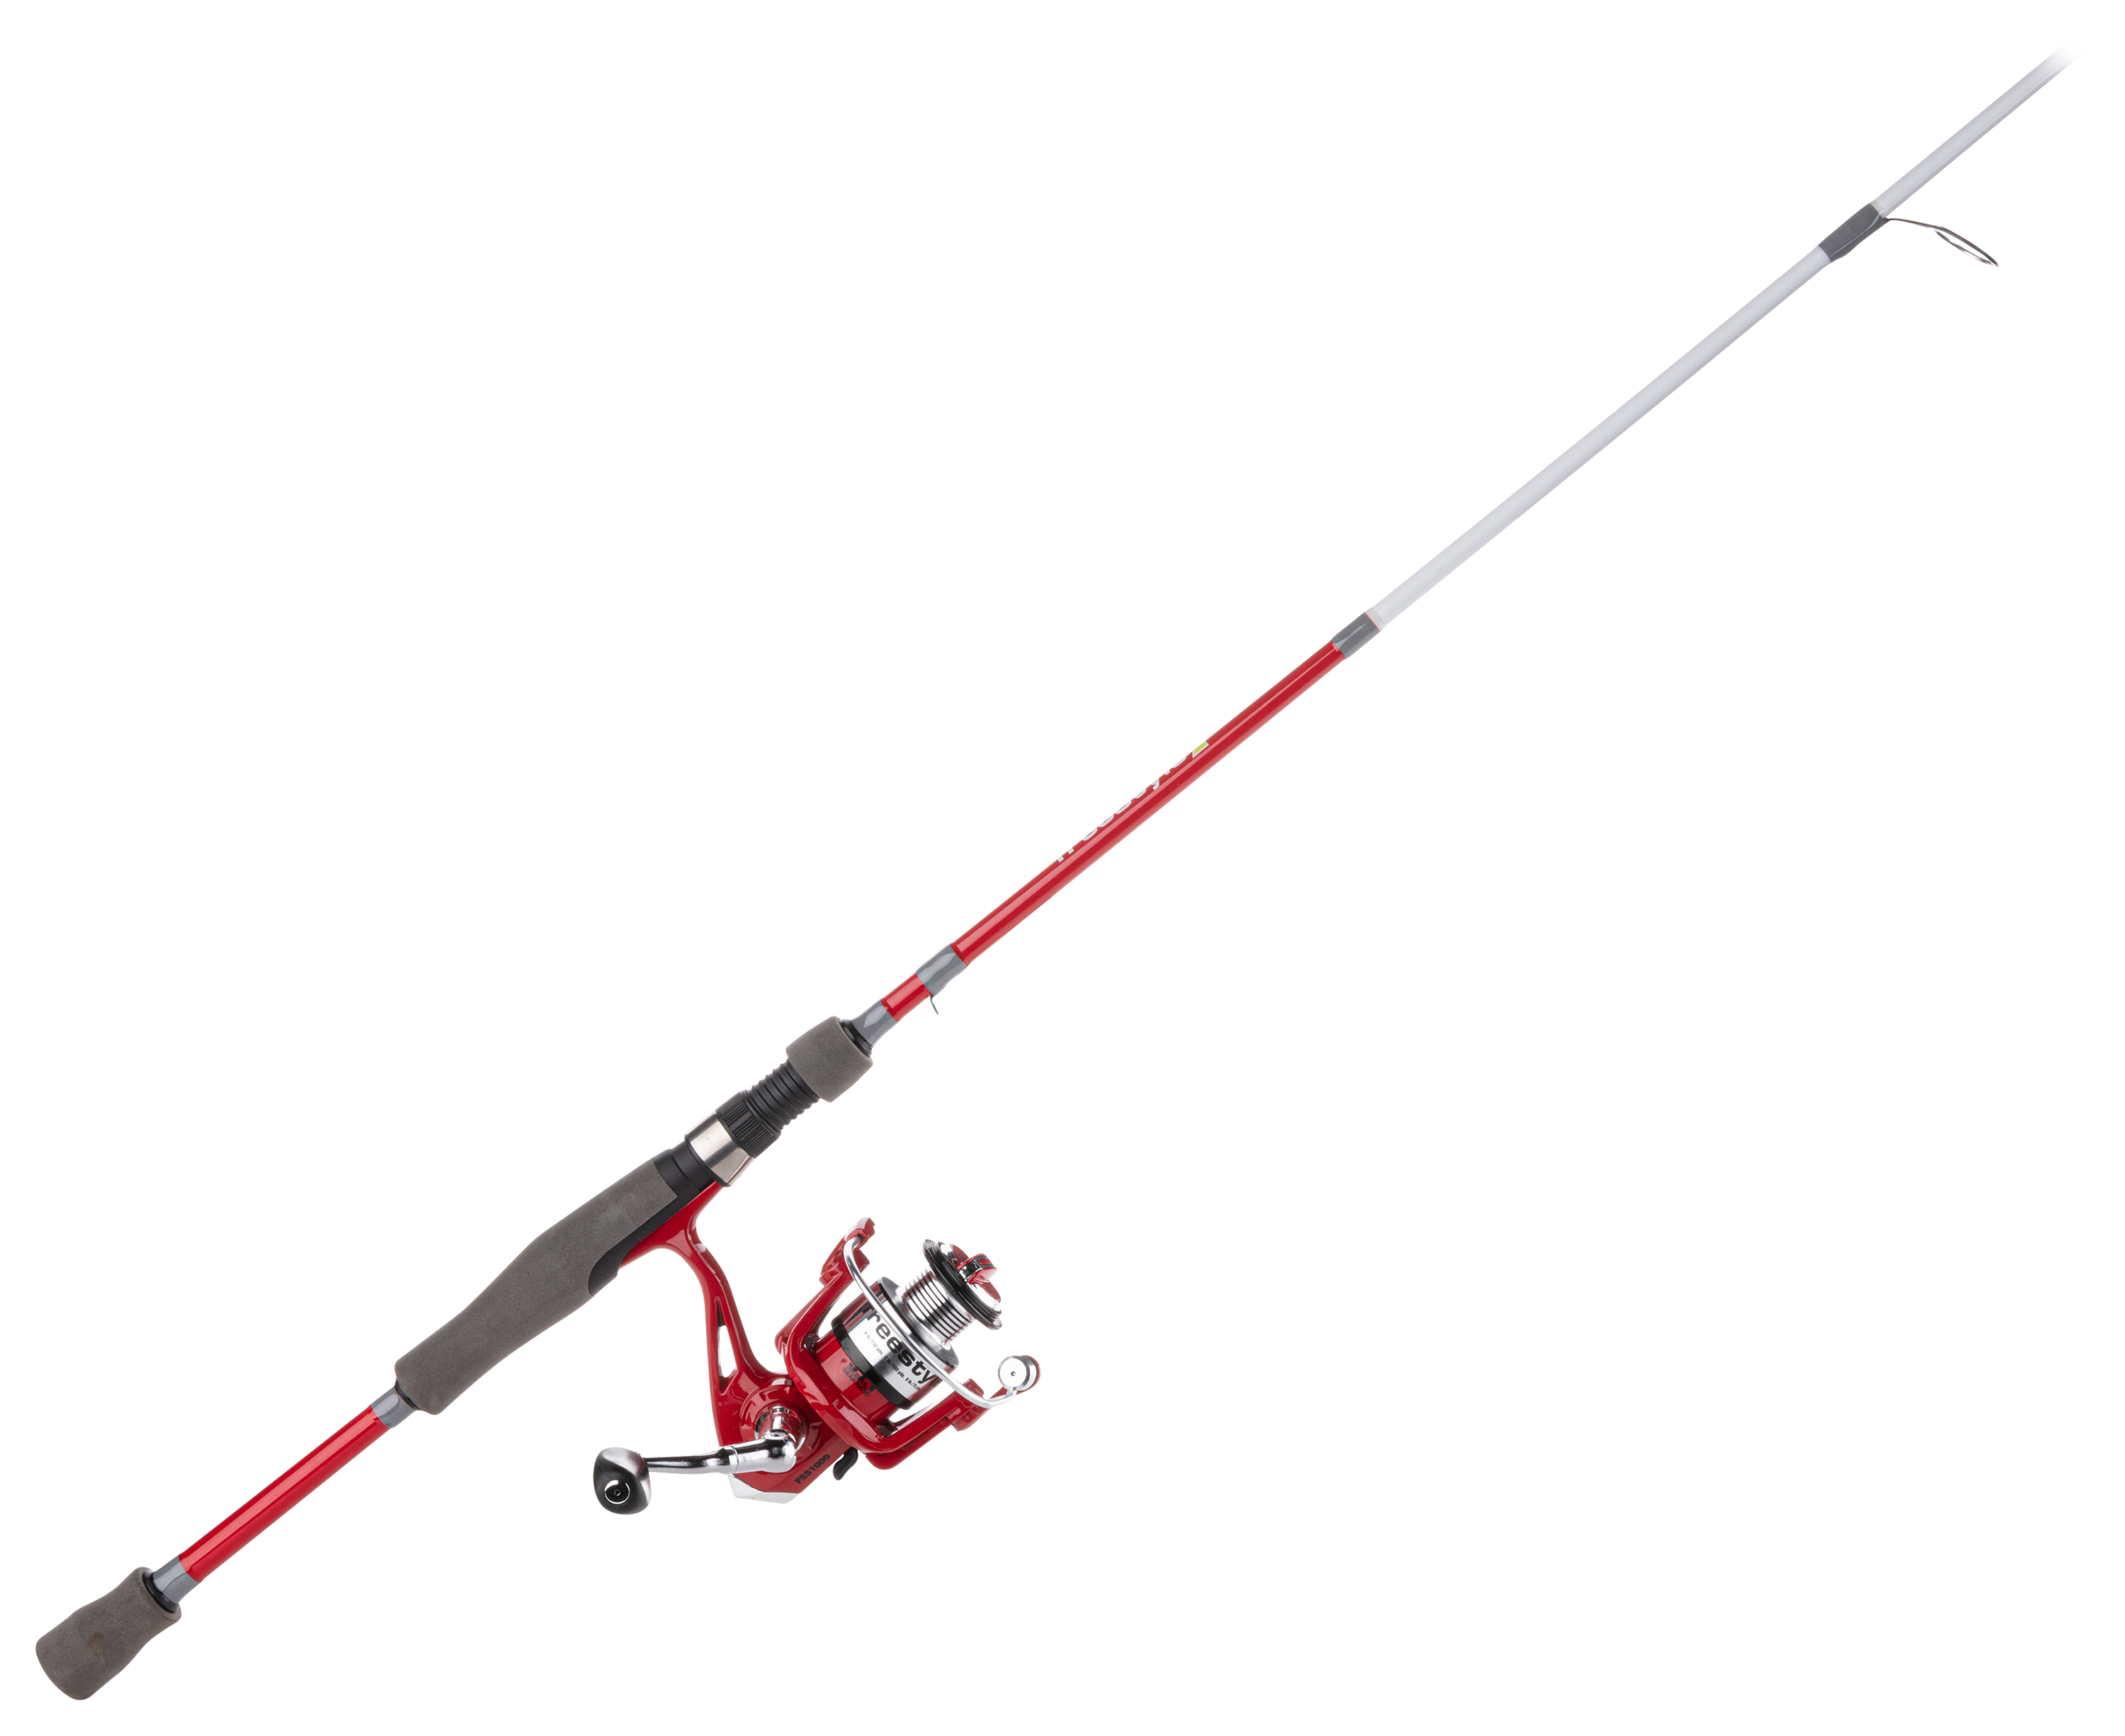 Bass Pro Shops: Bass Pro Shops Tourney Special Spinning Combo 